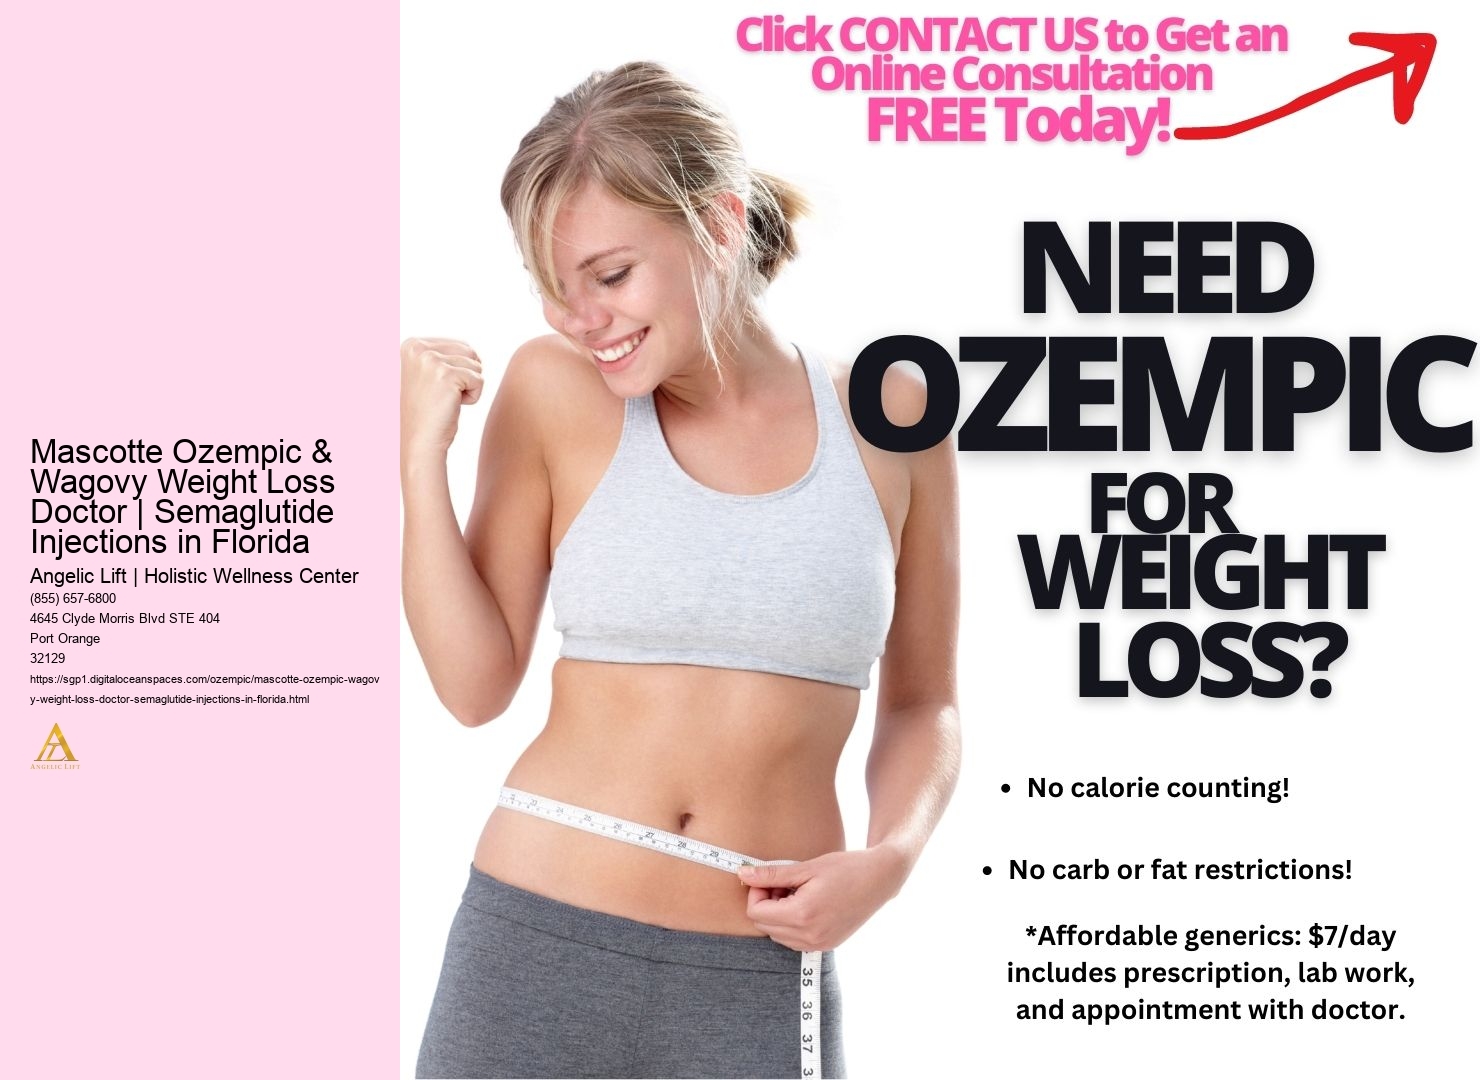 Mascotte Ozempic & Wagovy Weight Loss Doctor | Semaglutide Injections in Florida